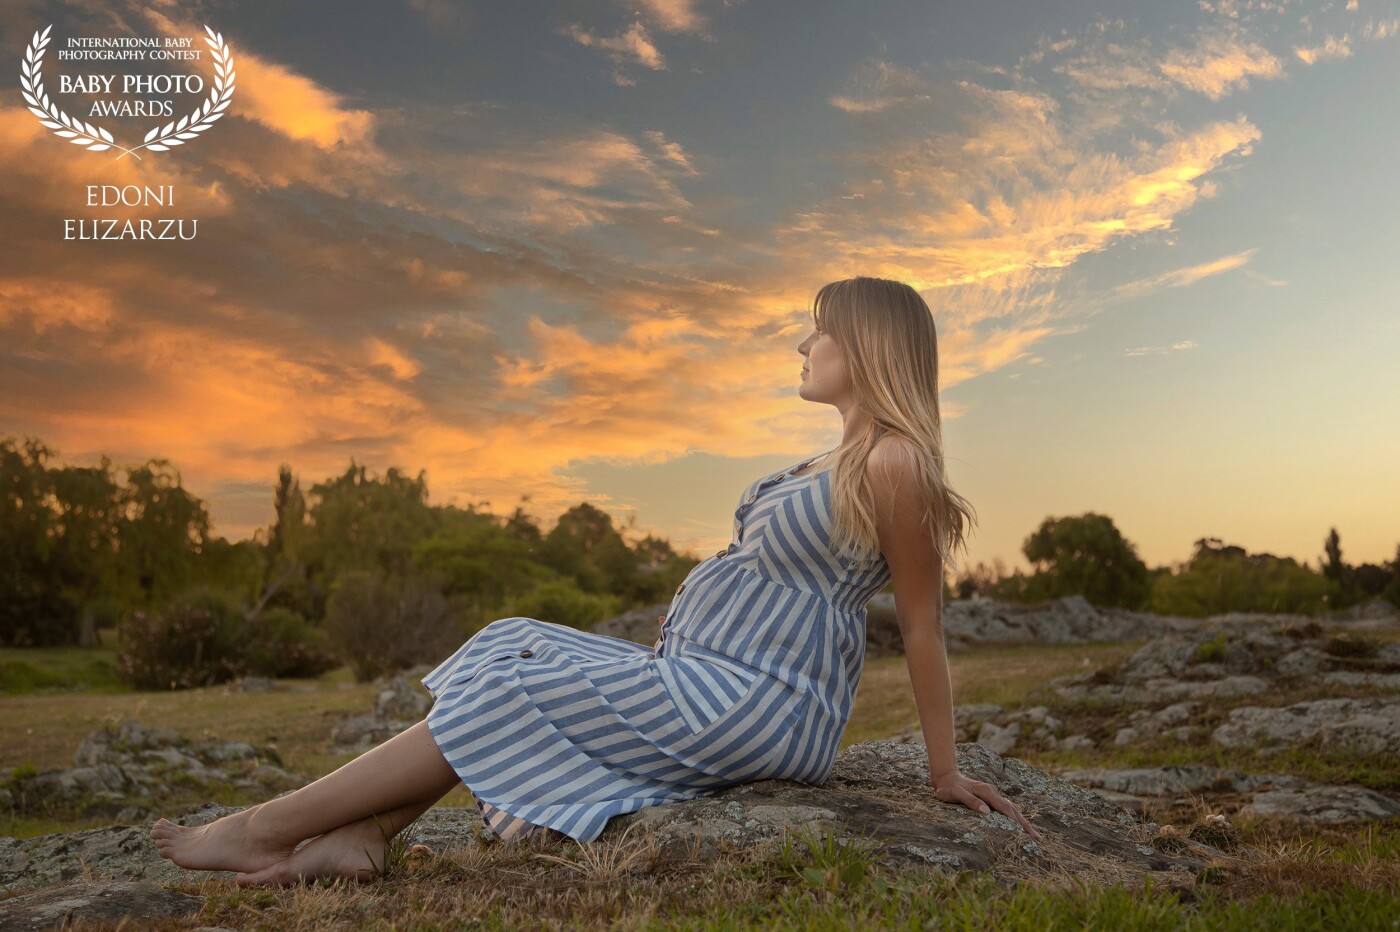 Beautiful mom to be session, waiting for her second girl, combined with great sunset, in Uruguay. <br />
We did some studio shots and also outdoor. 